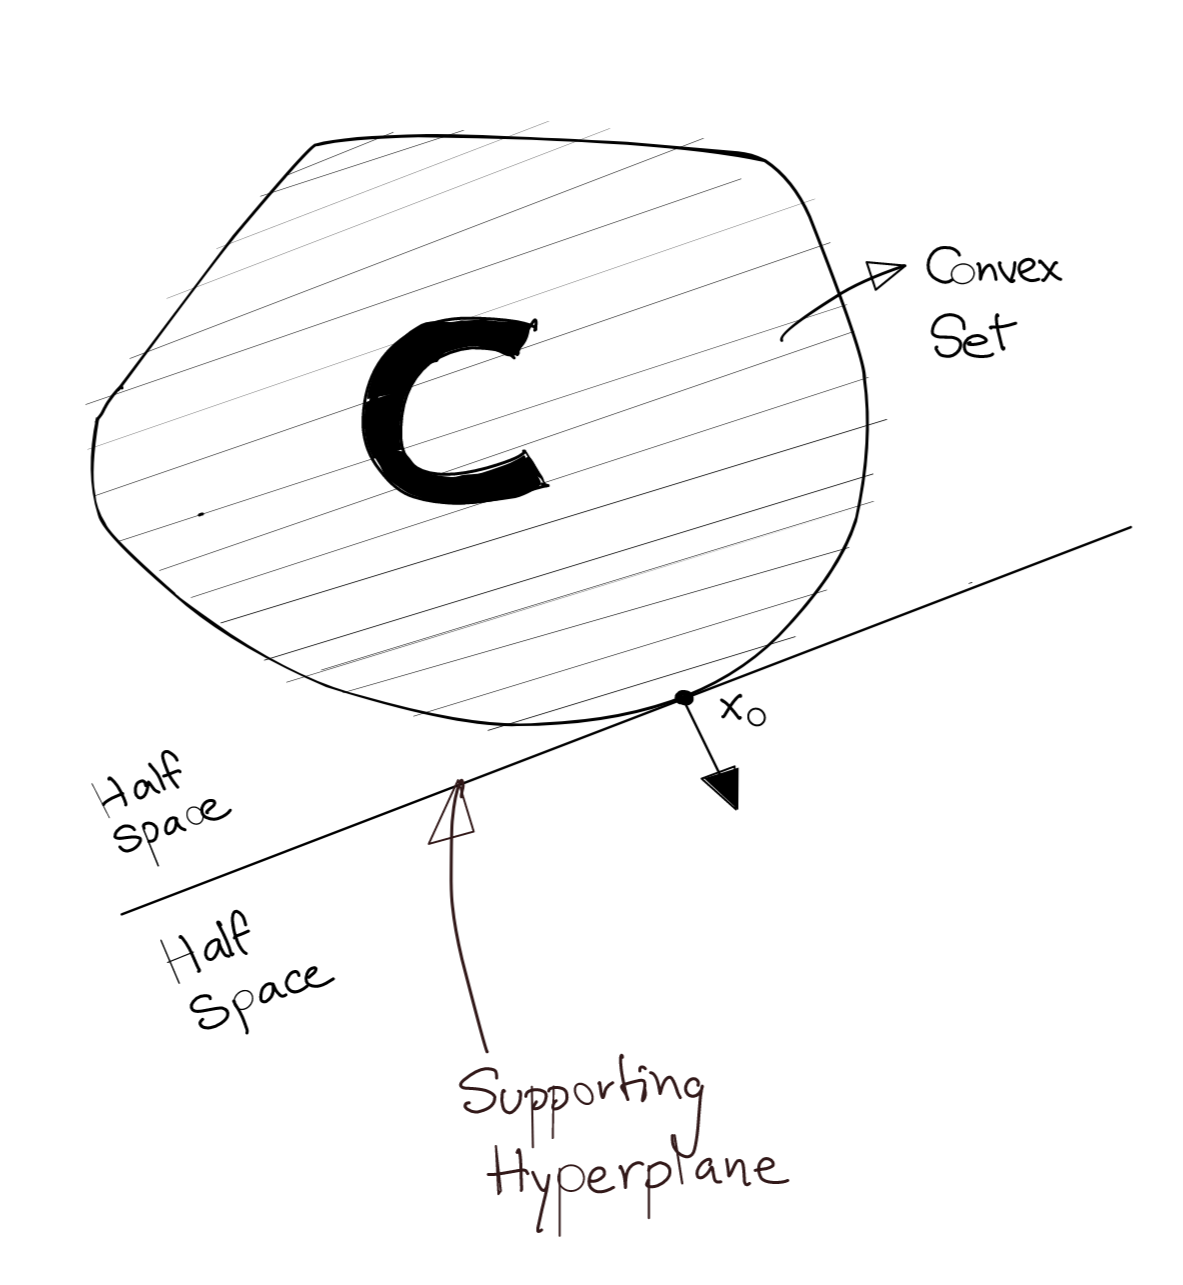 Supporting Hyperplane for a Convex Set